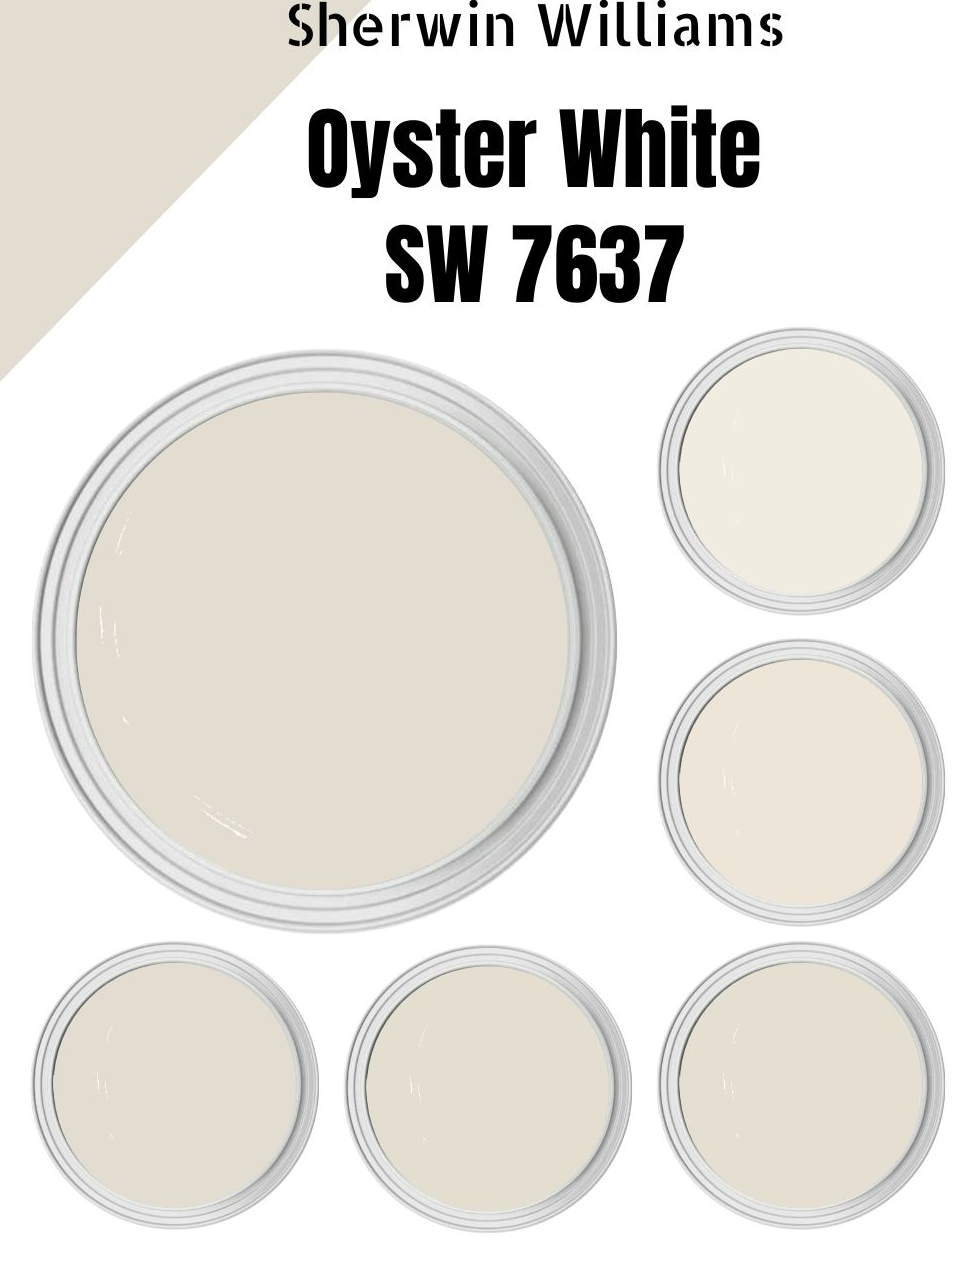 Sherwin-Williams Oyster White Color Palette